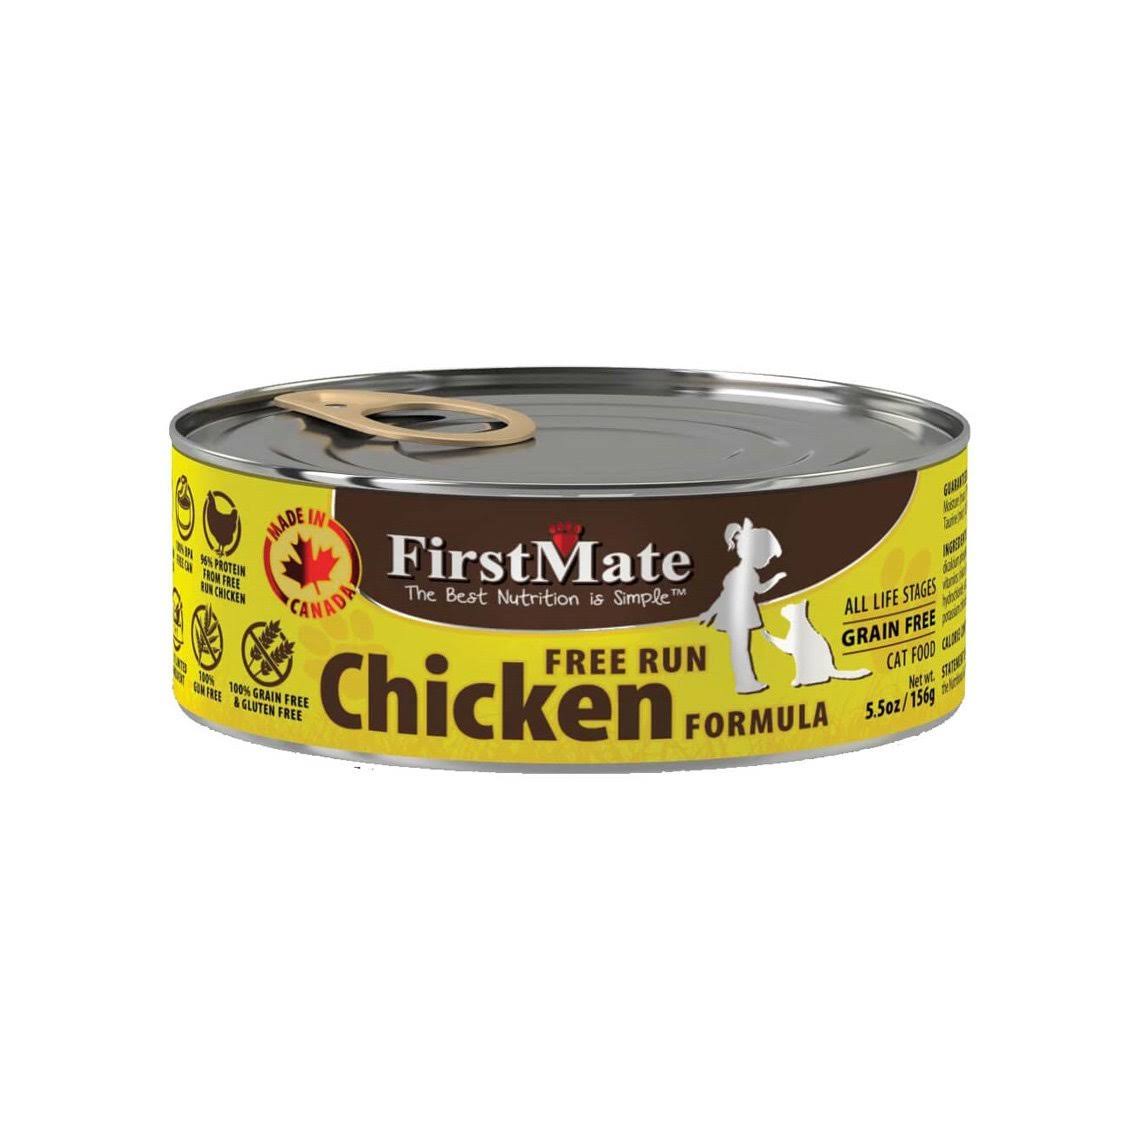 Firstmate Pet Foods Canned Cat Food - Chicken, 5.5oz, 24pk